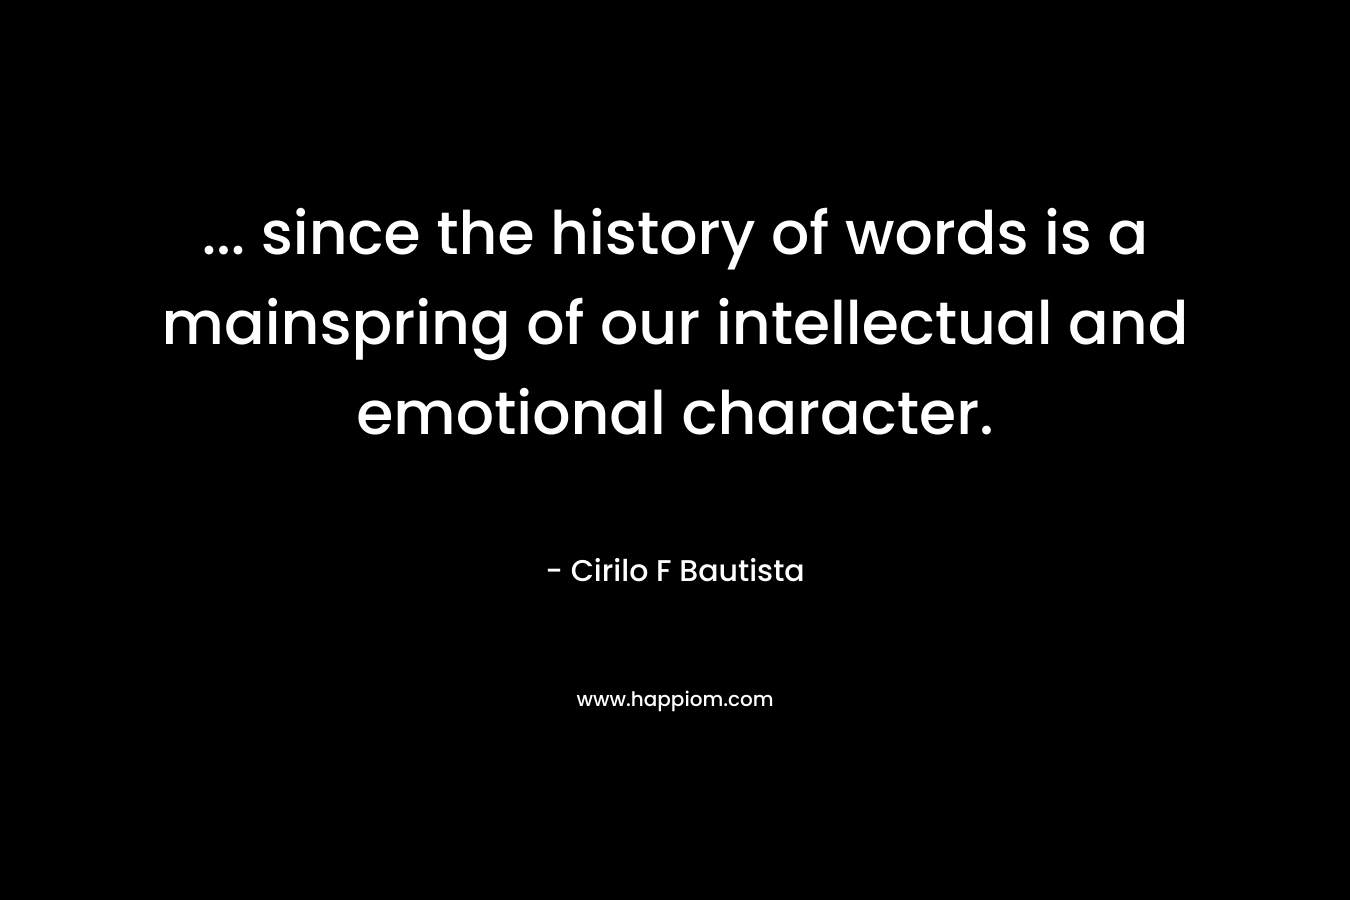 ... since the history of words is a mainspring of our intellectual and emotional character.